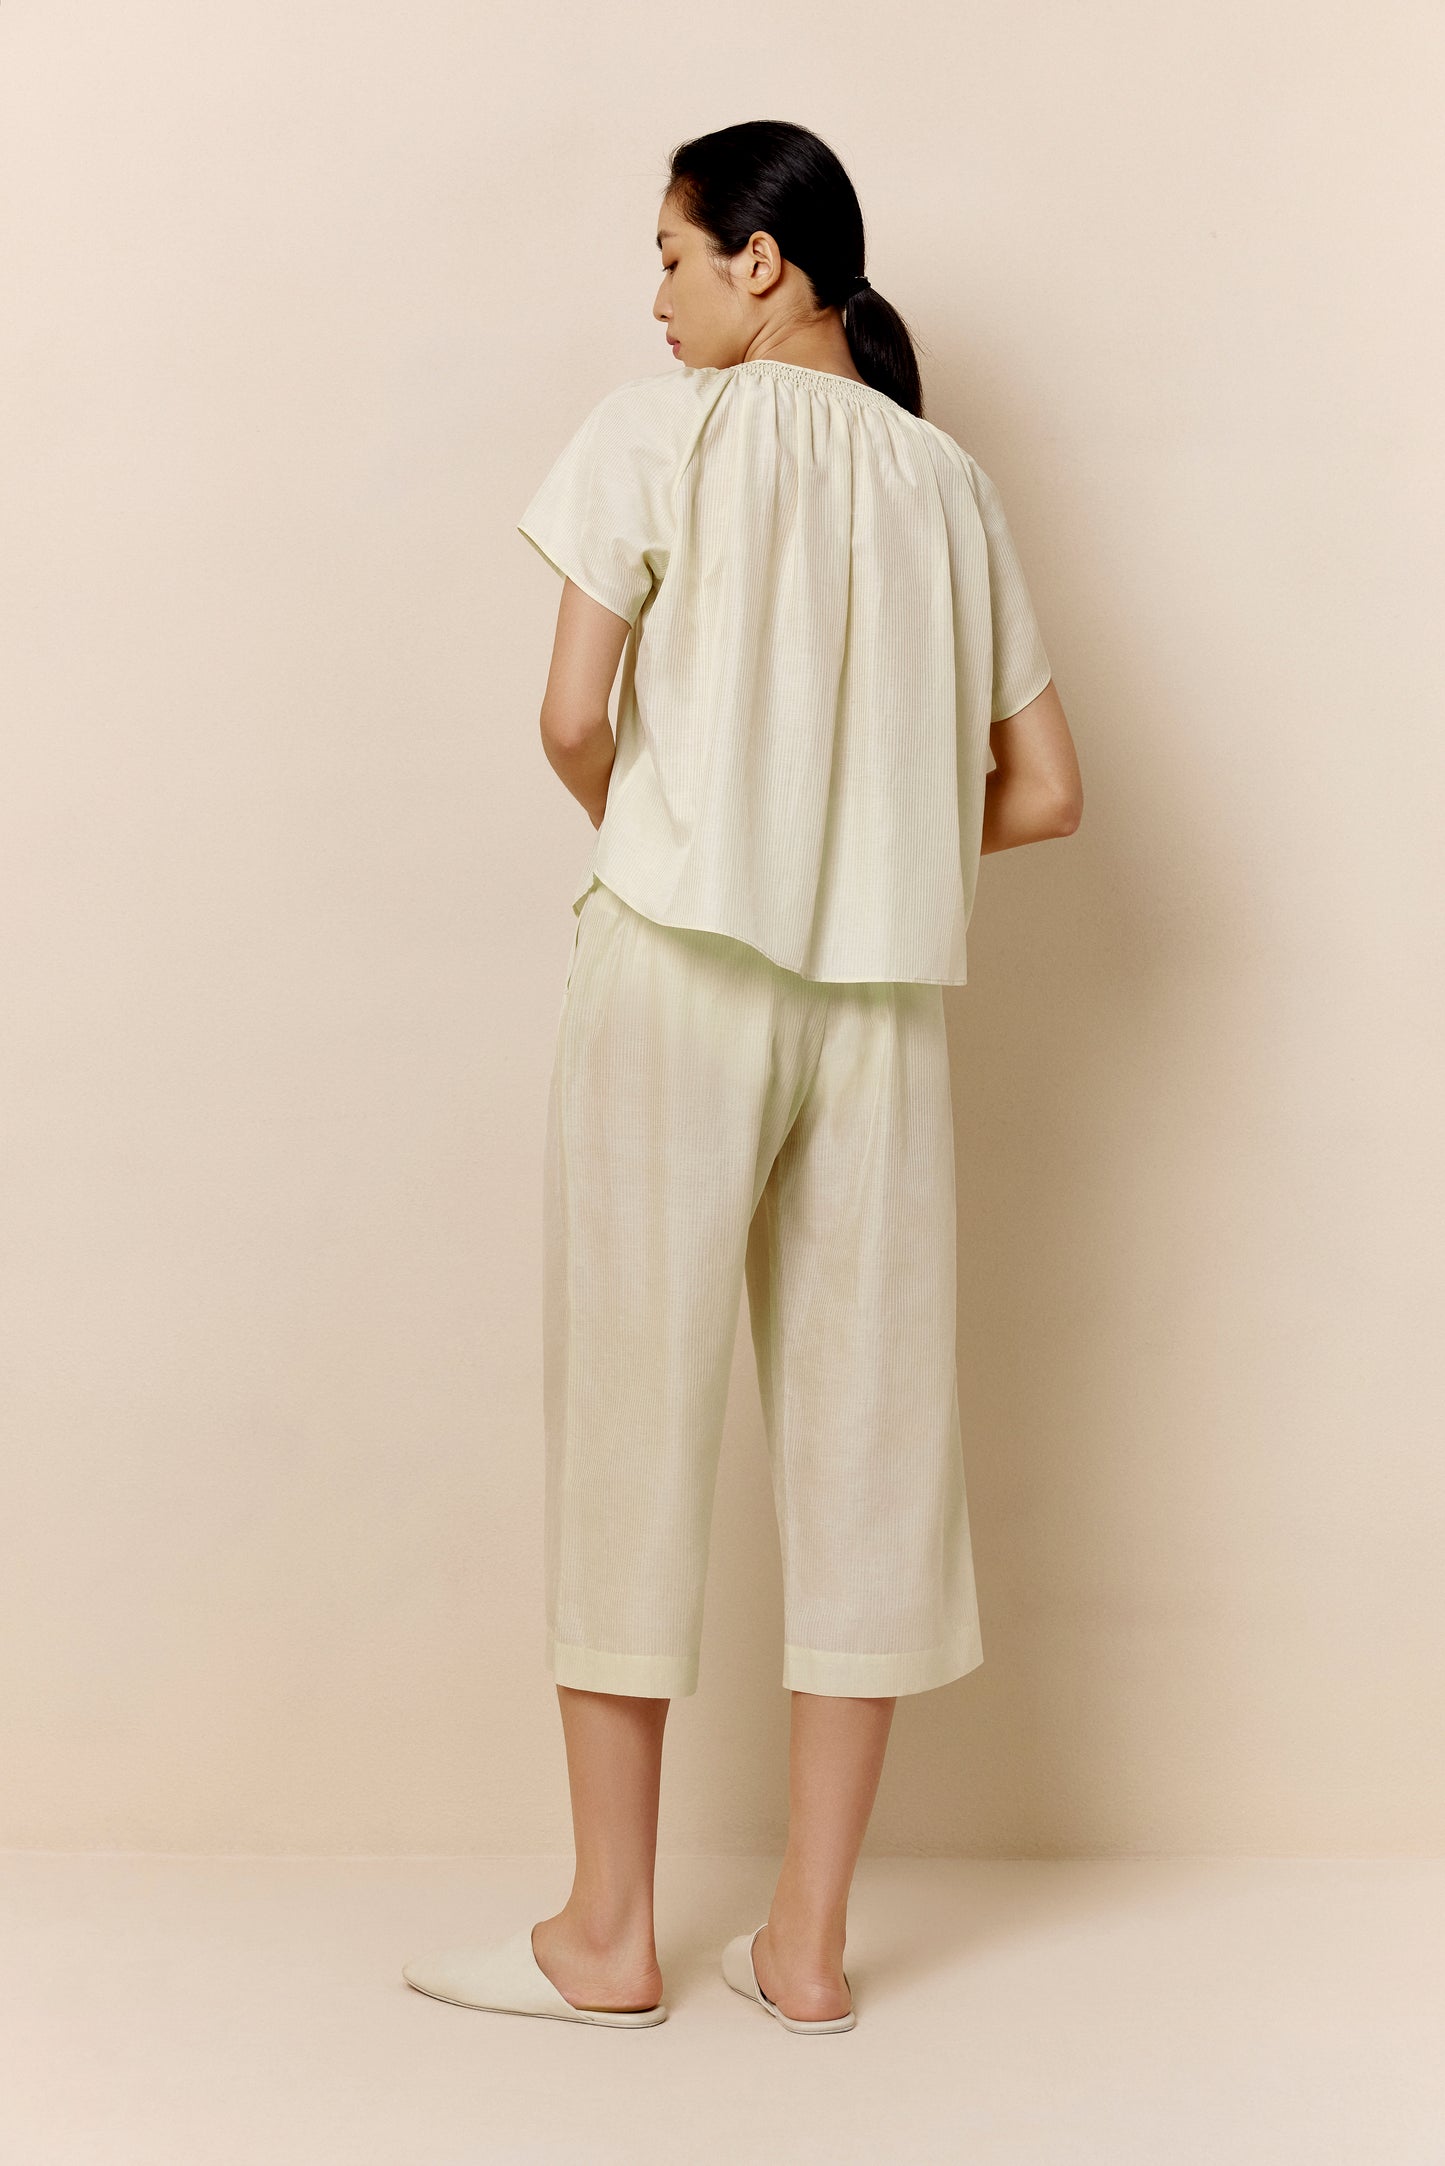 A woman wears off-white pajamas from back.